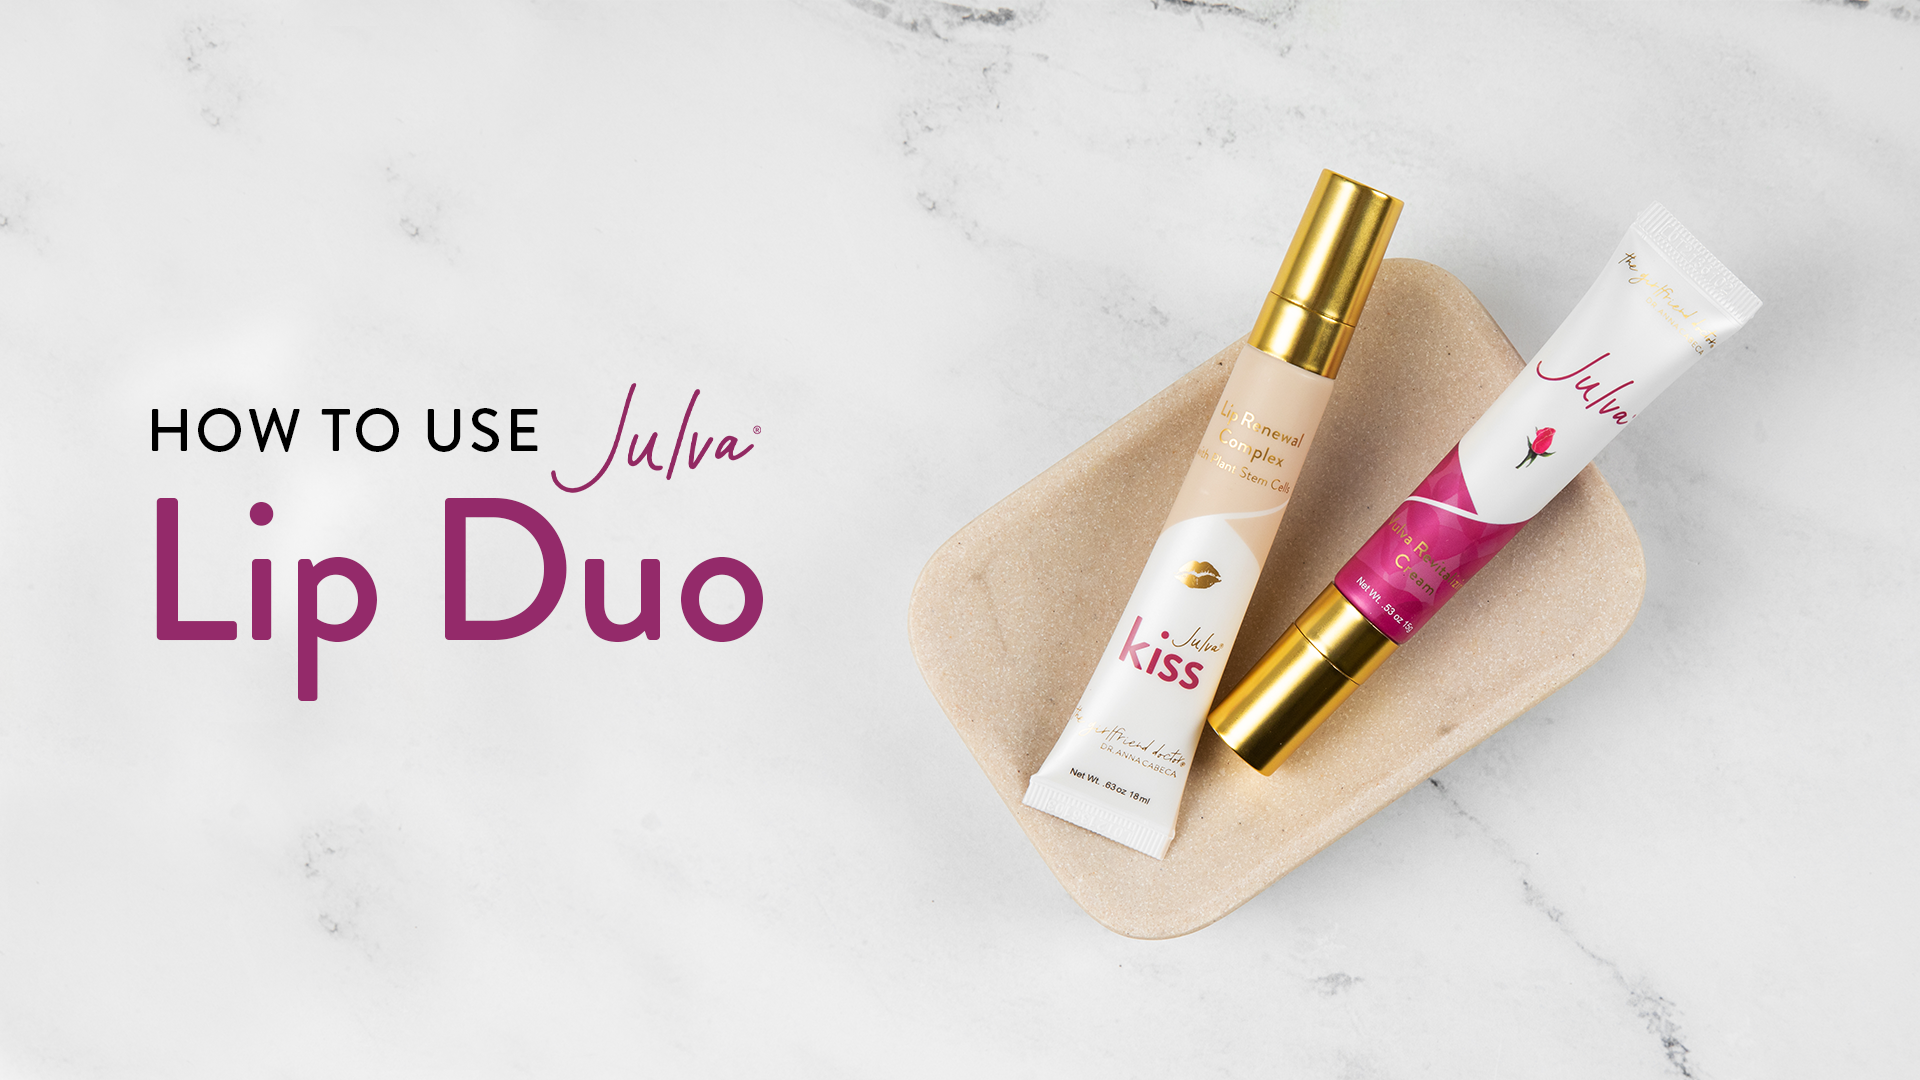 Load video: How to use Julva Lip Duo